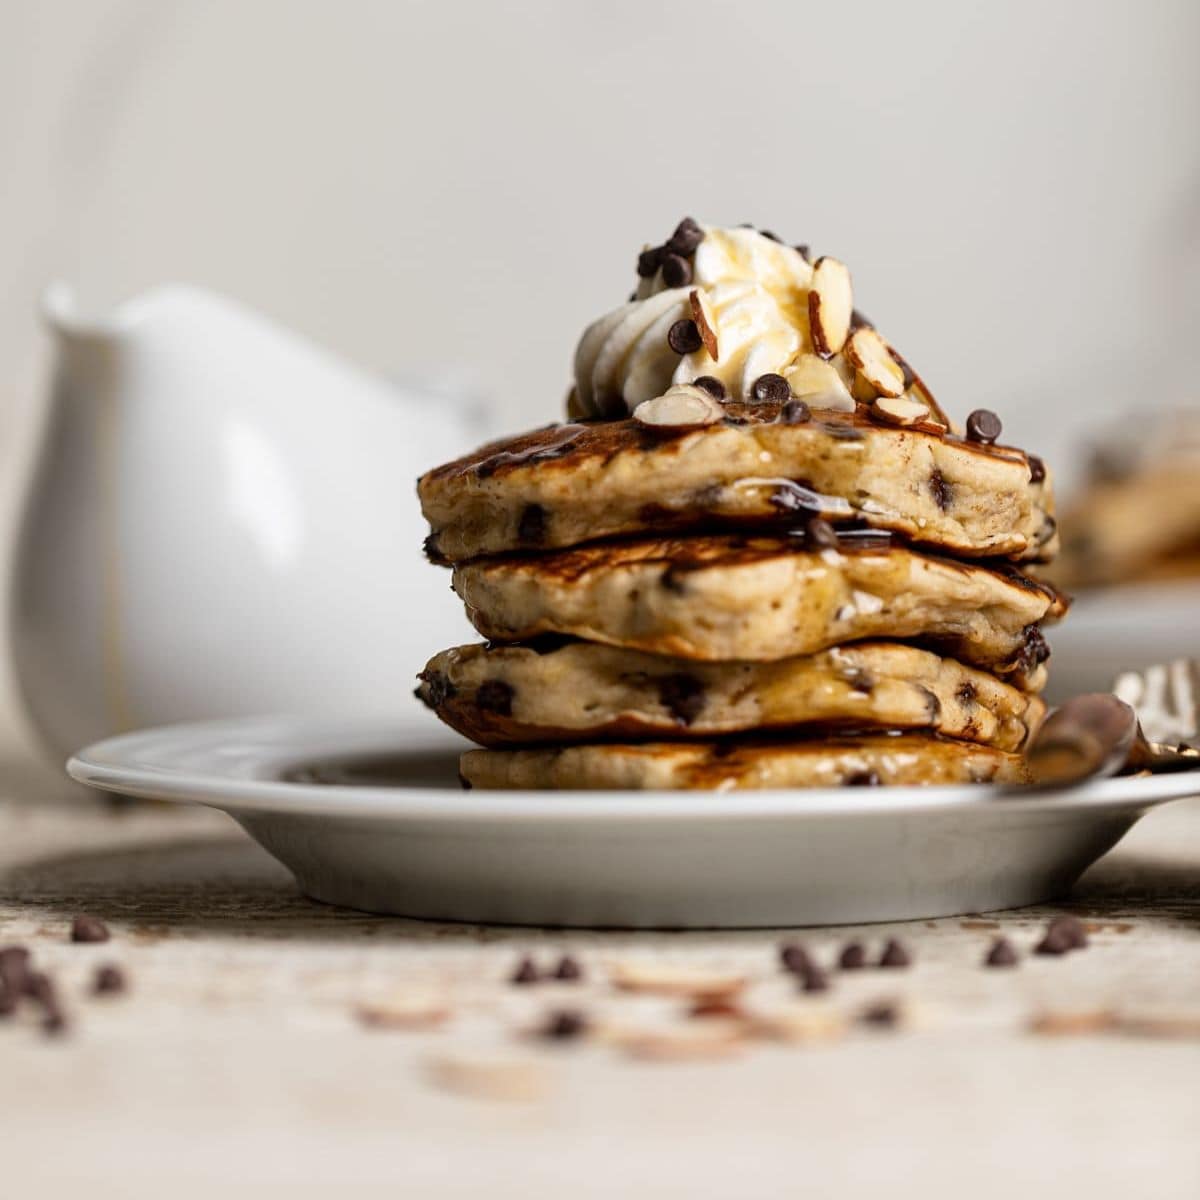 Stack of pancakes in a white plate with chocolate chips + almonds on a white wood table.